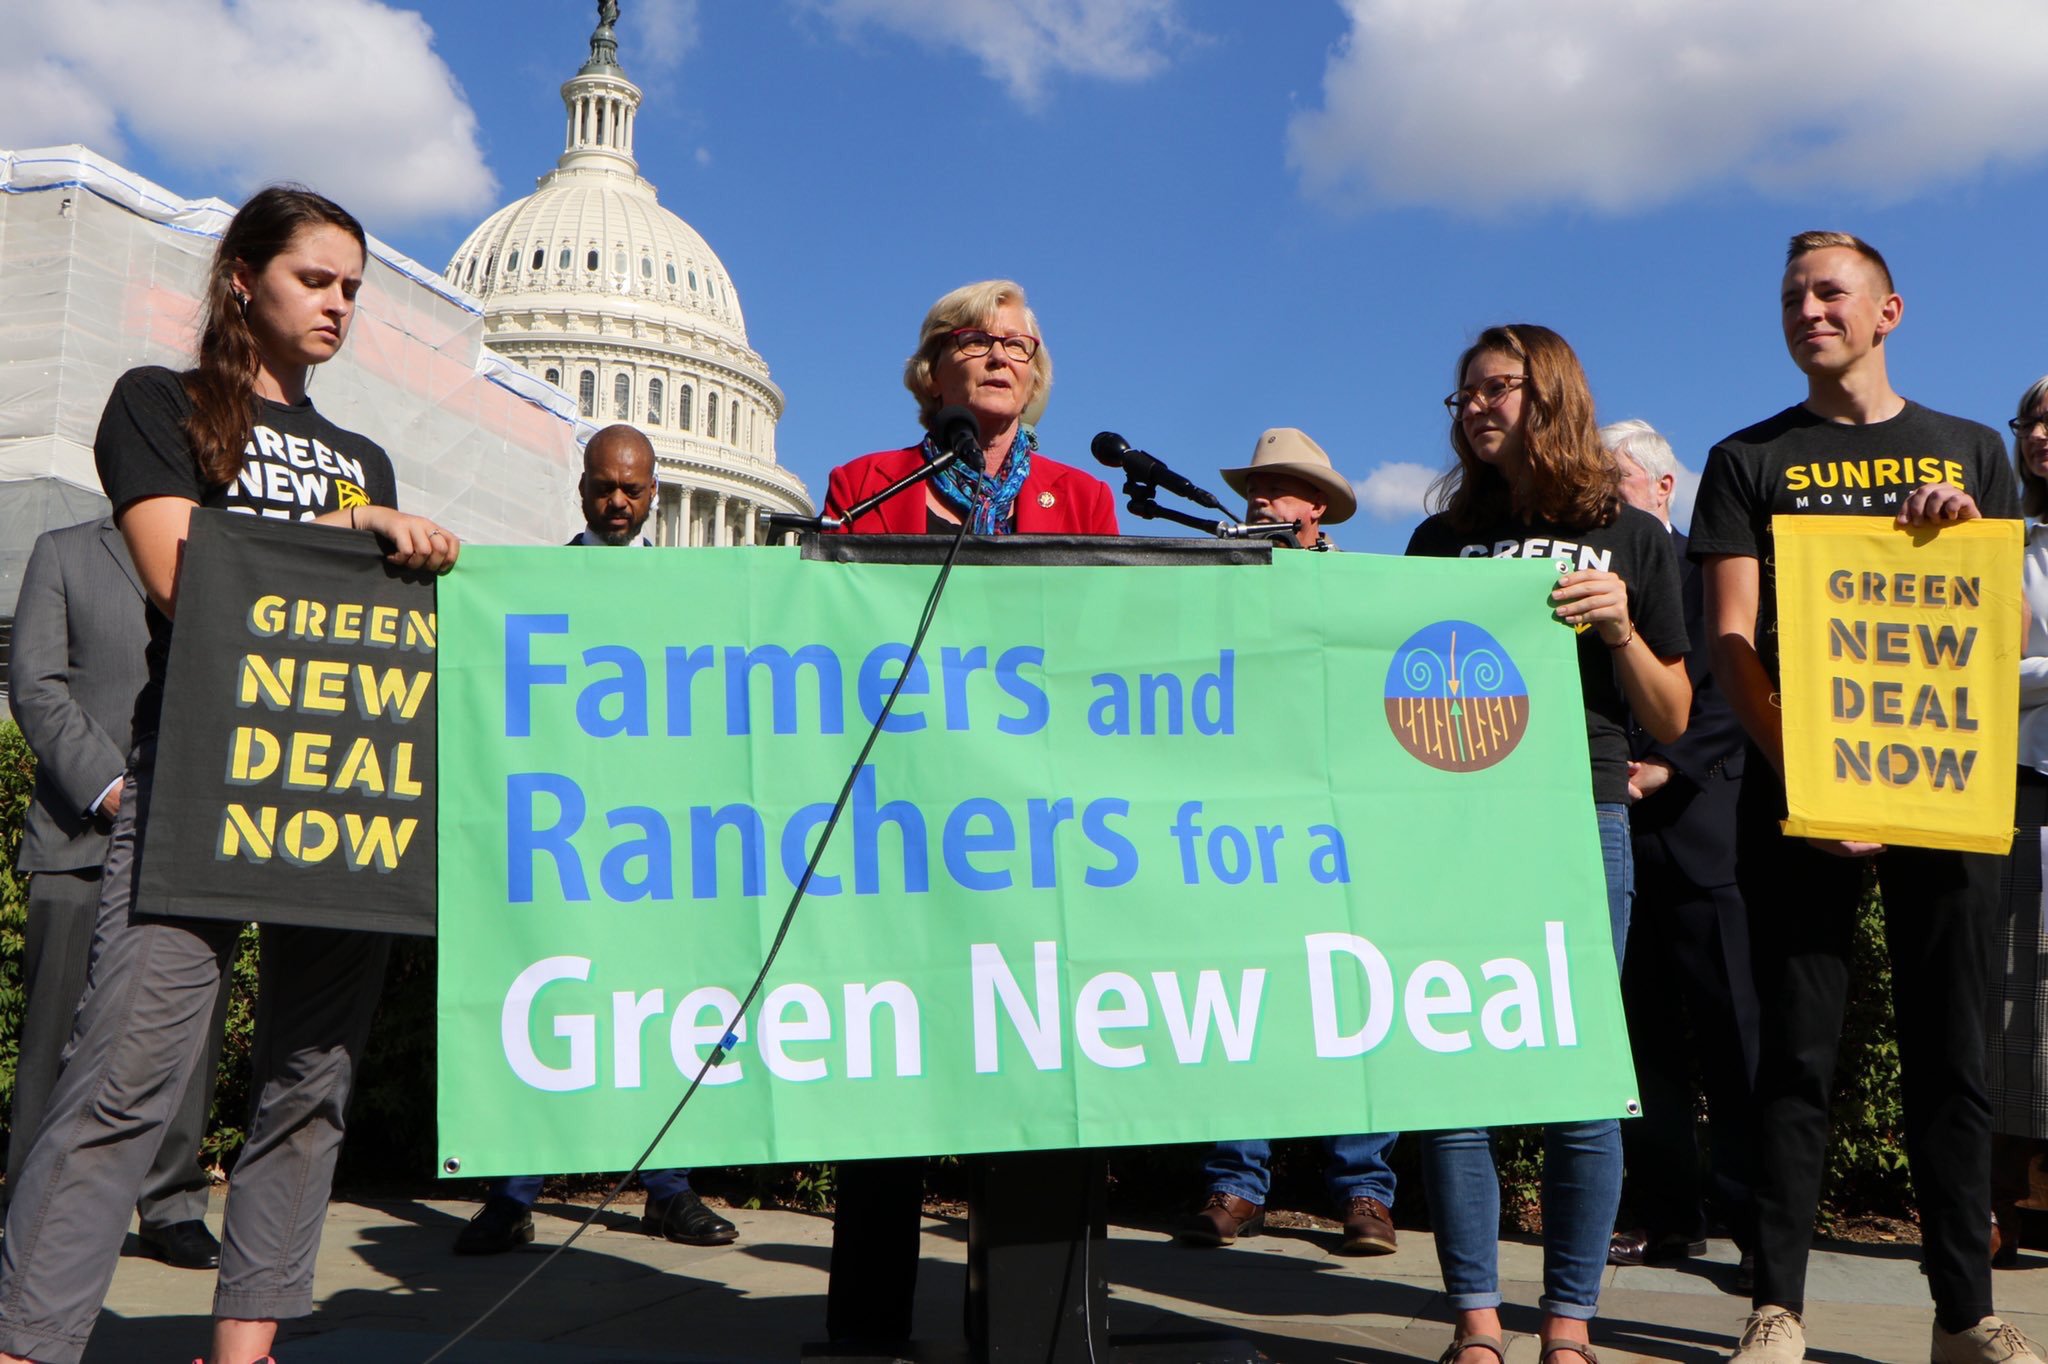 Coalition Representing 10,000 U.S. Farmers & Ranchers Urges Congress to